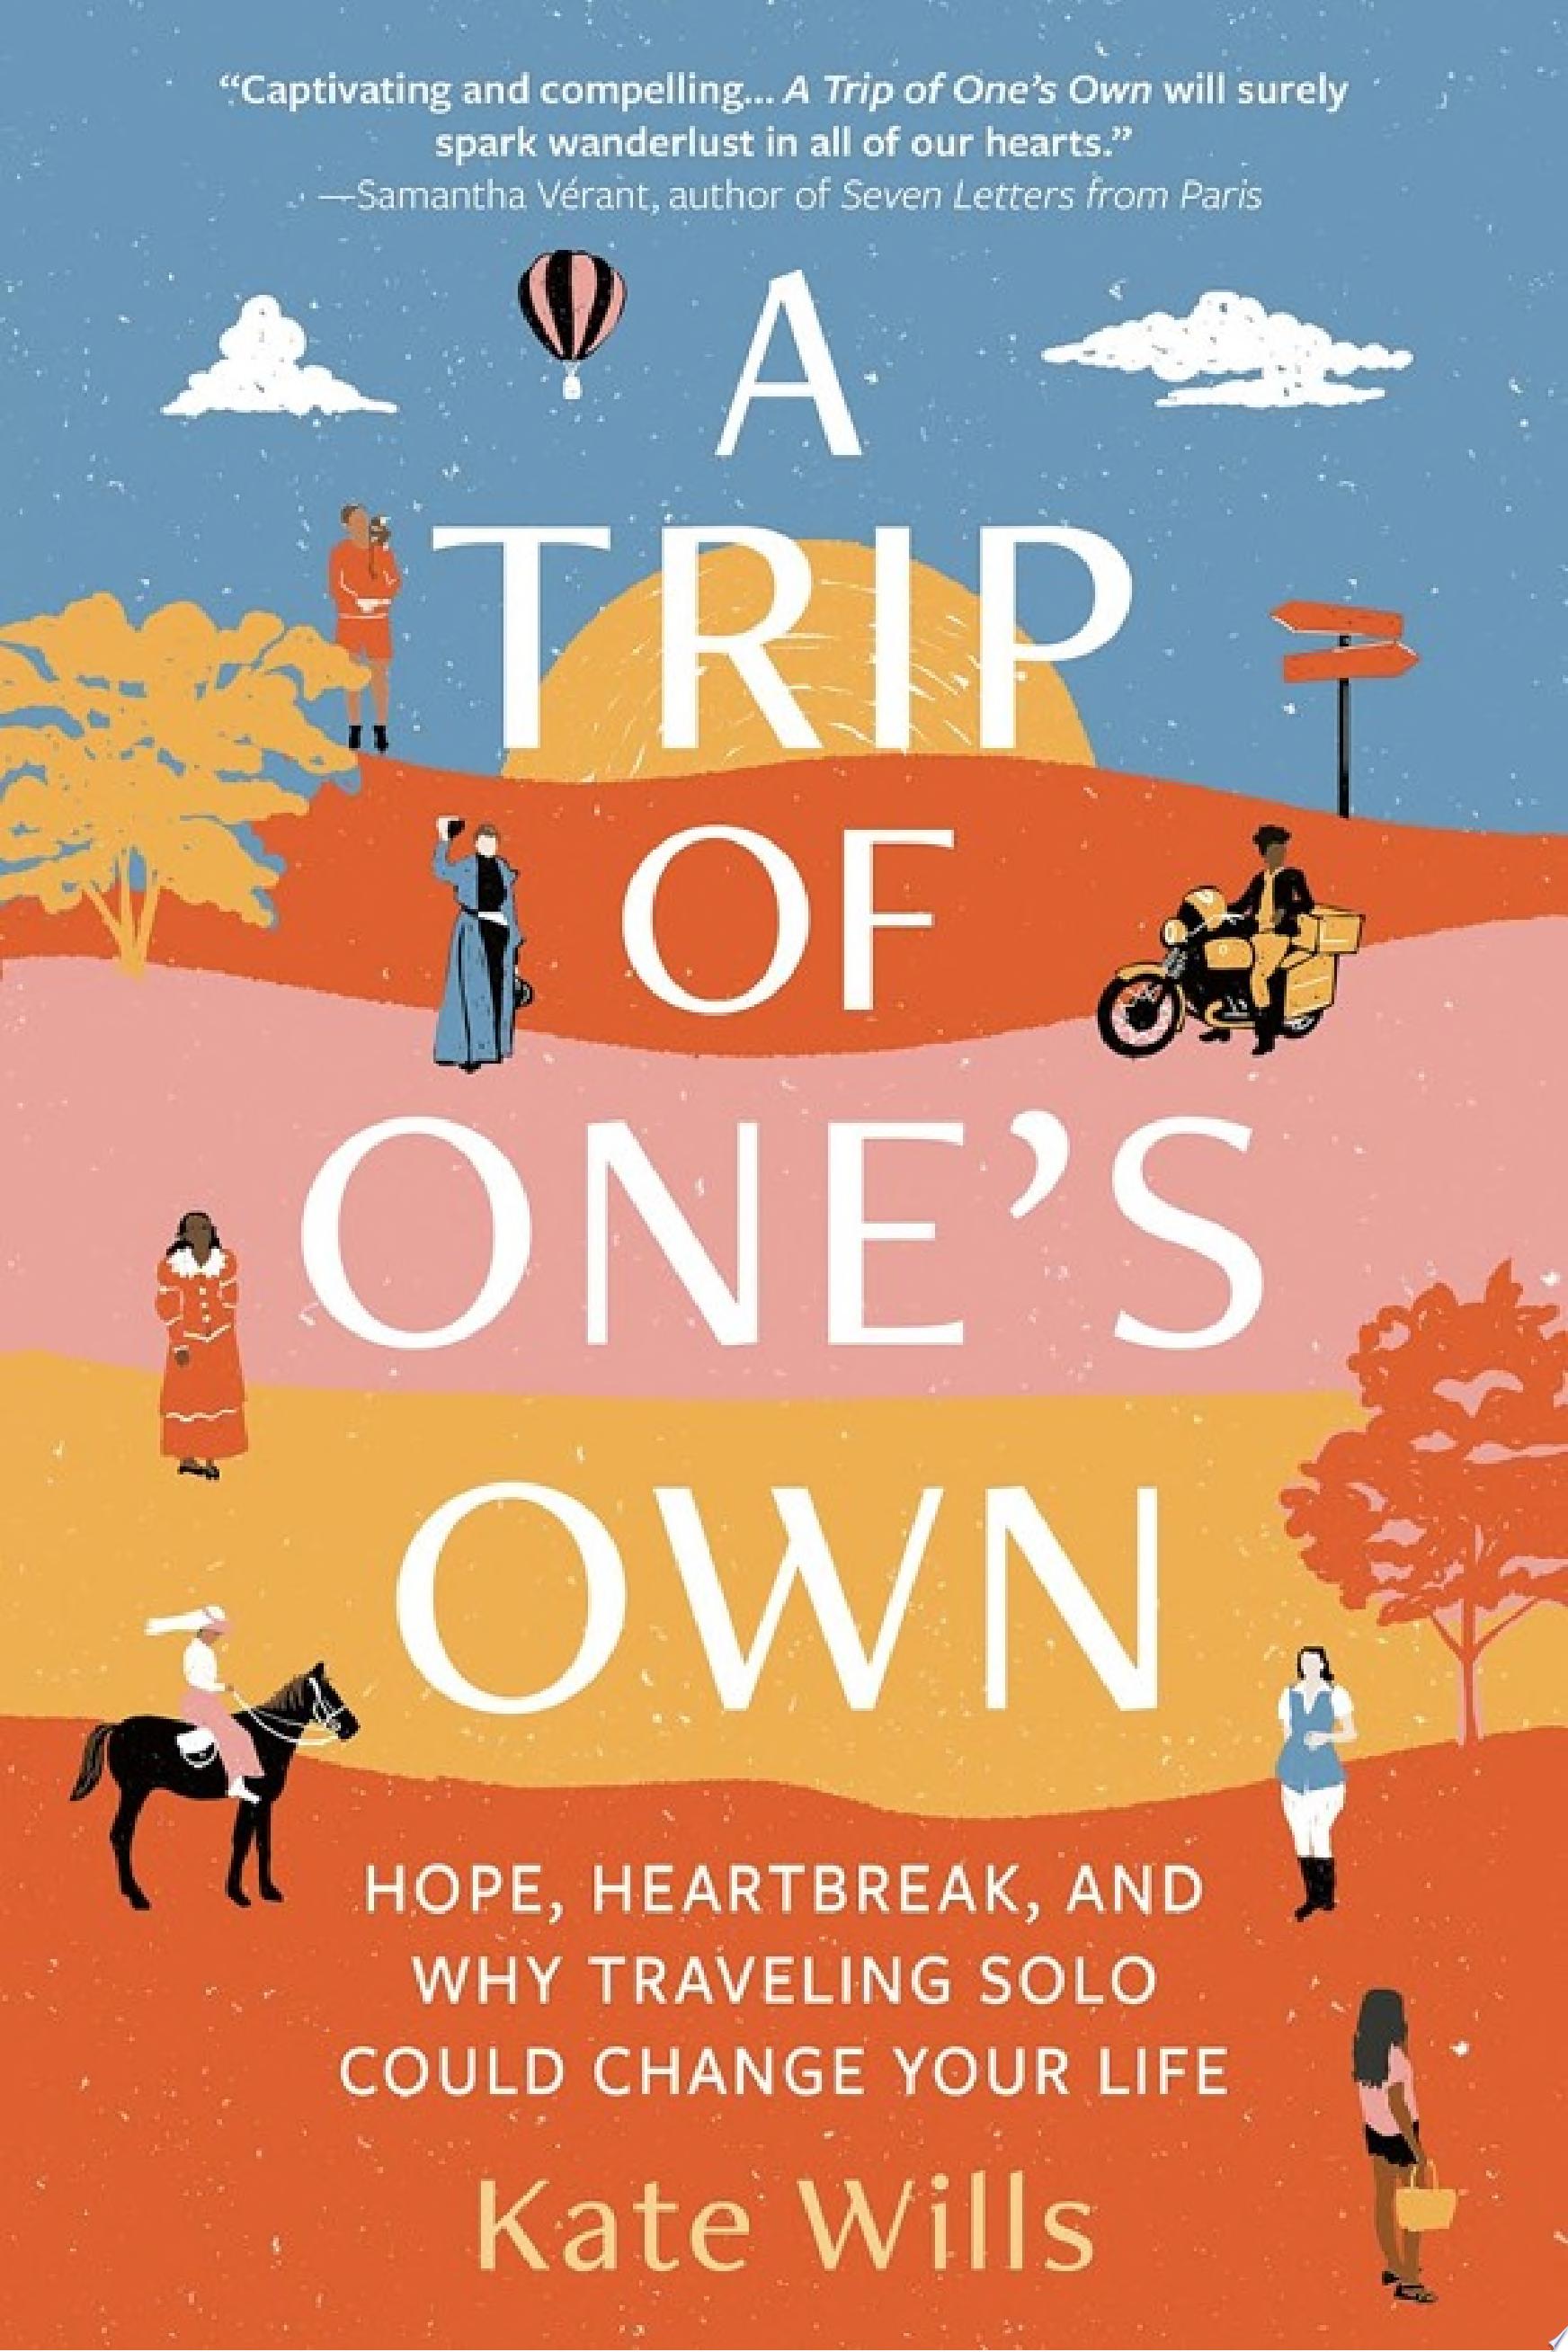 Image for "A Trip of One's Own"